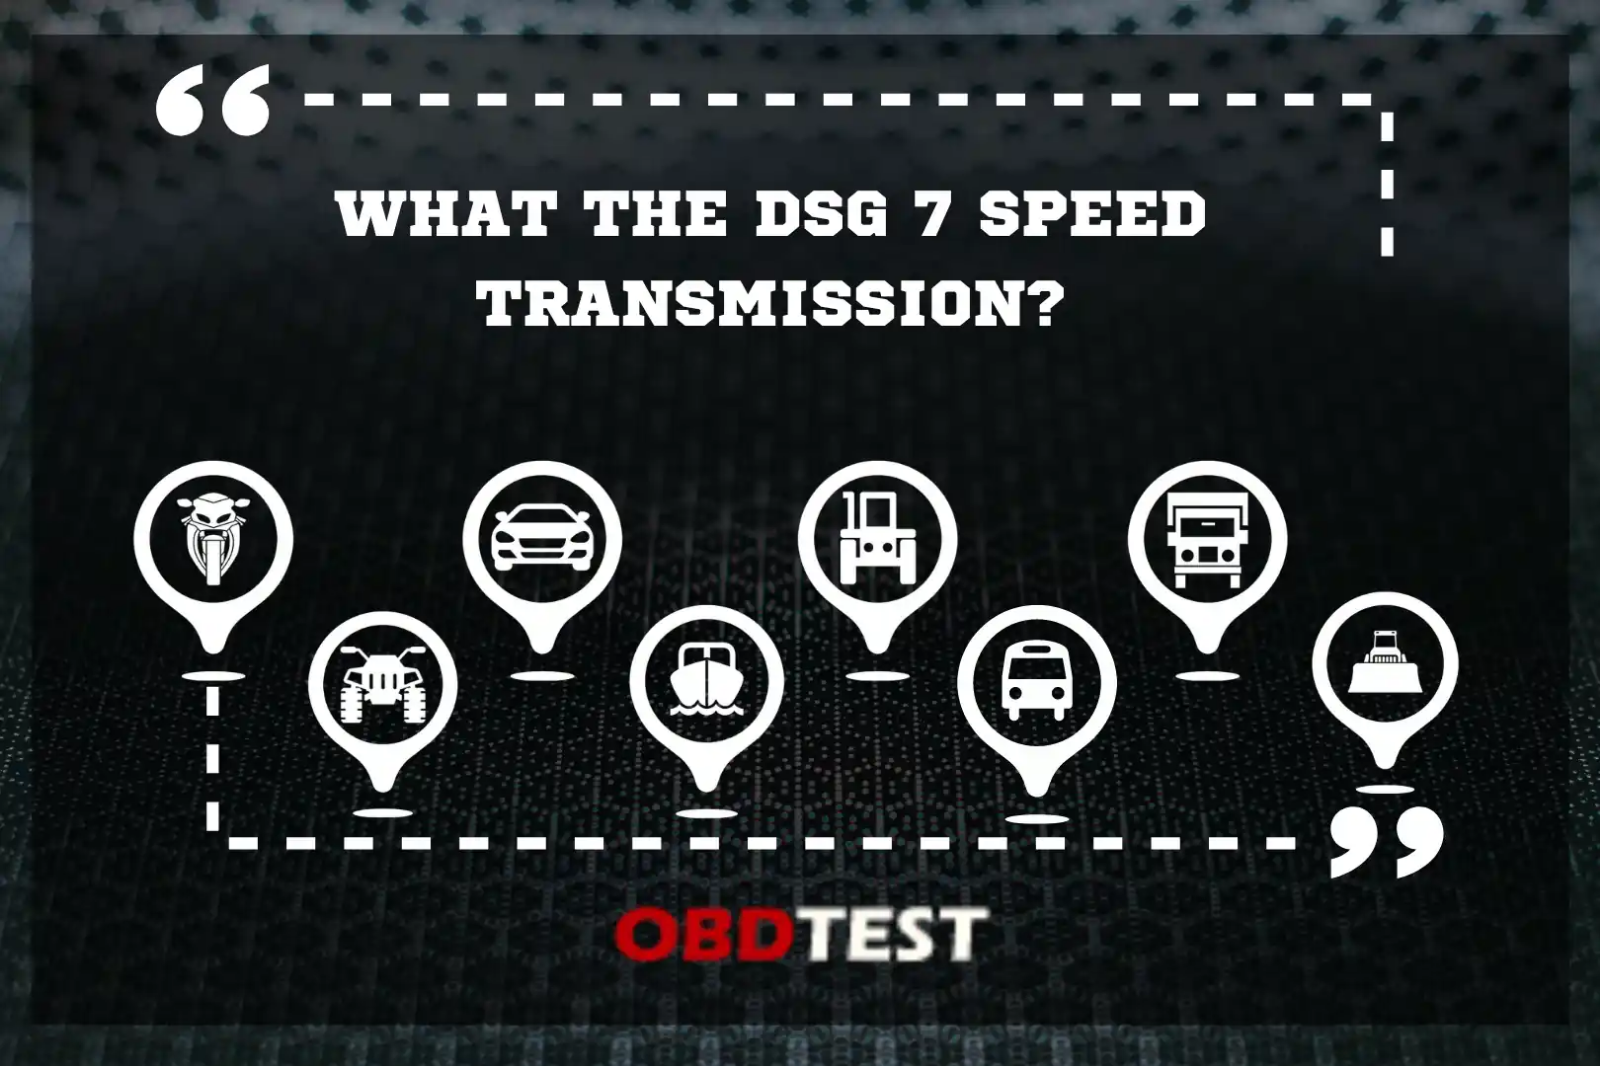 What The DSG 7 Speed Transmission?